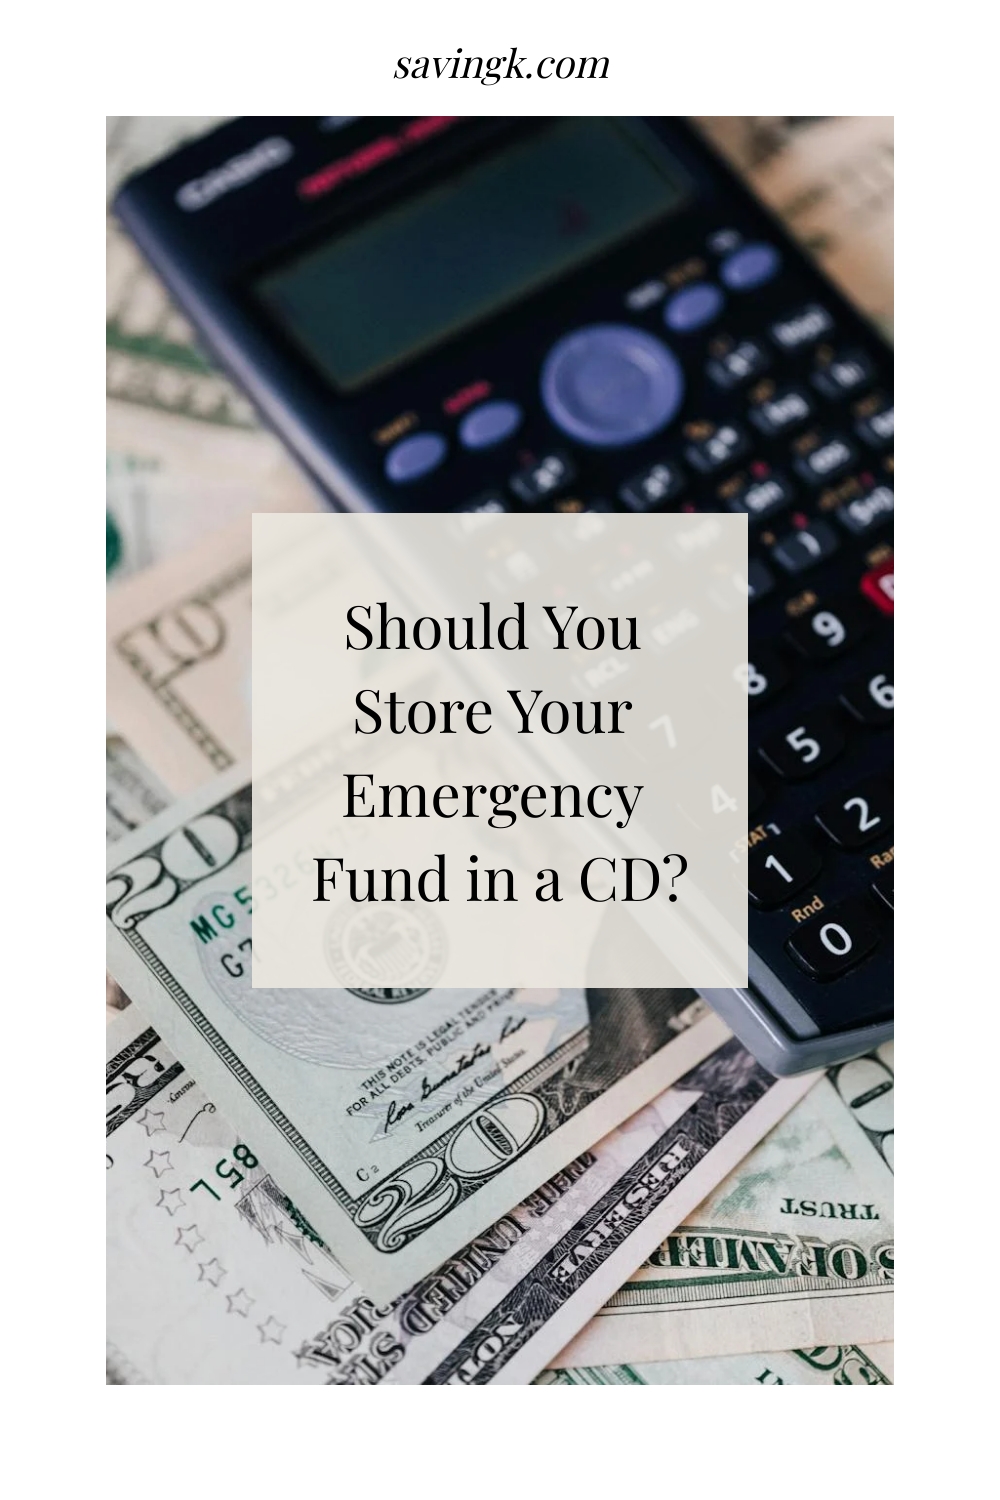 Should You Store Your Emergency Fund in a CD?